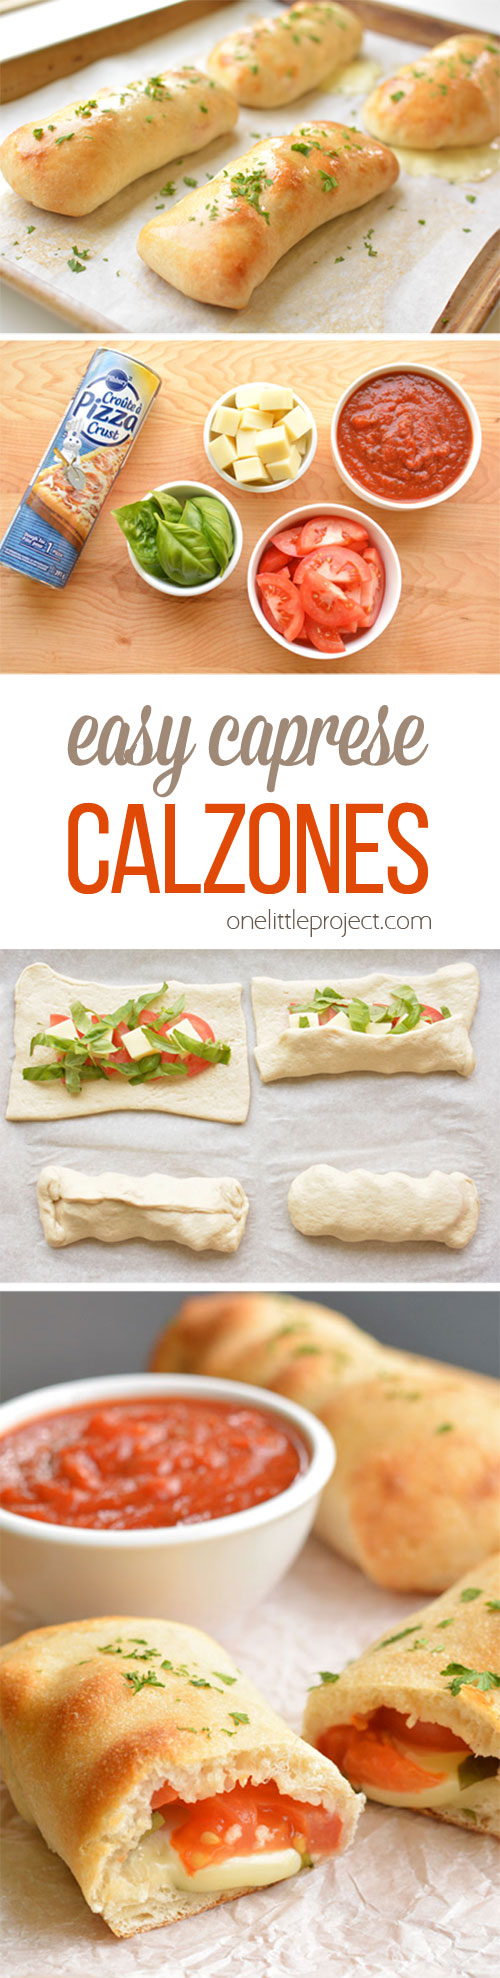 These caprese calzones are so easy to make and they taste SO GOOD! Only 5 ingredients and they take less than 10 min to prepare. The fresh basil and tomato flavors are amazing!